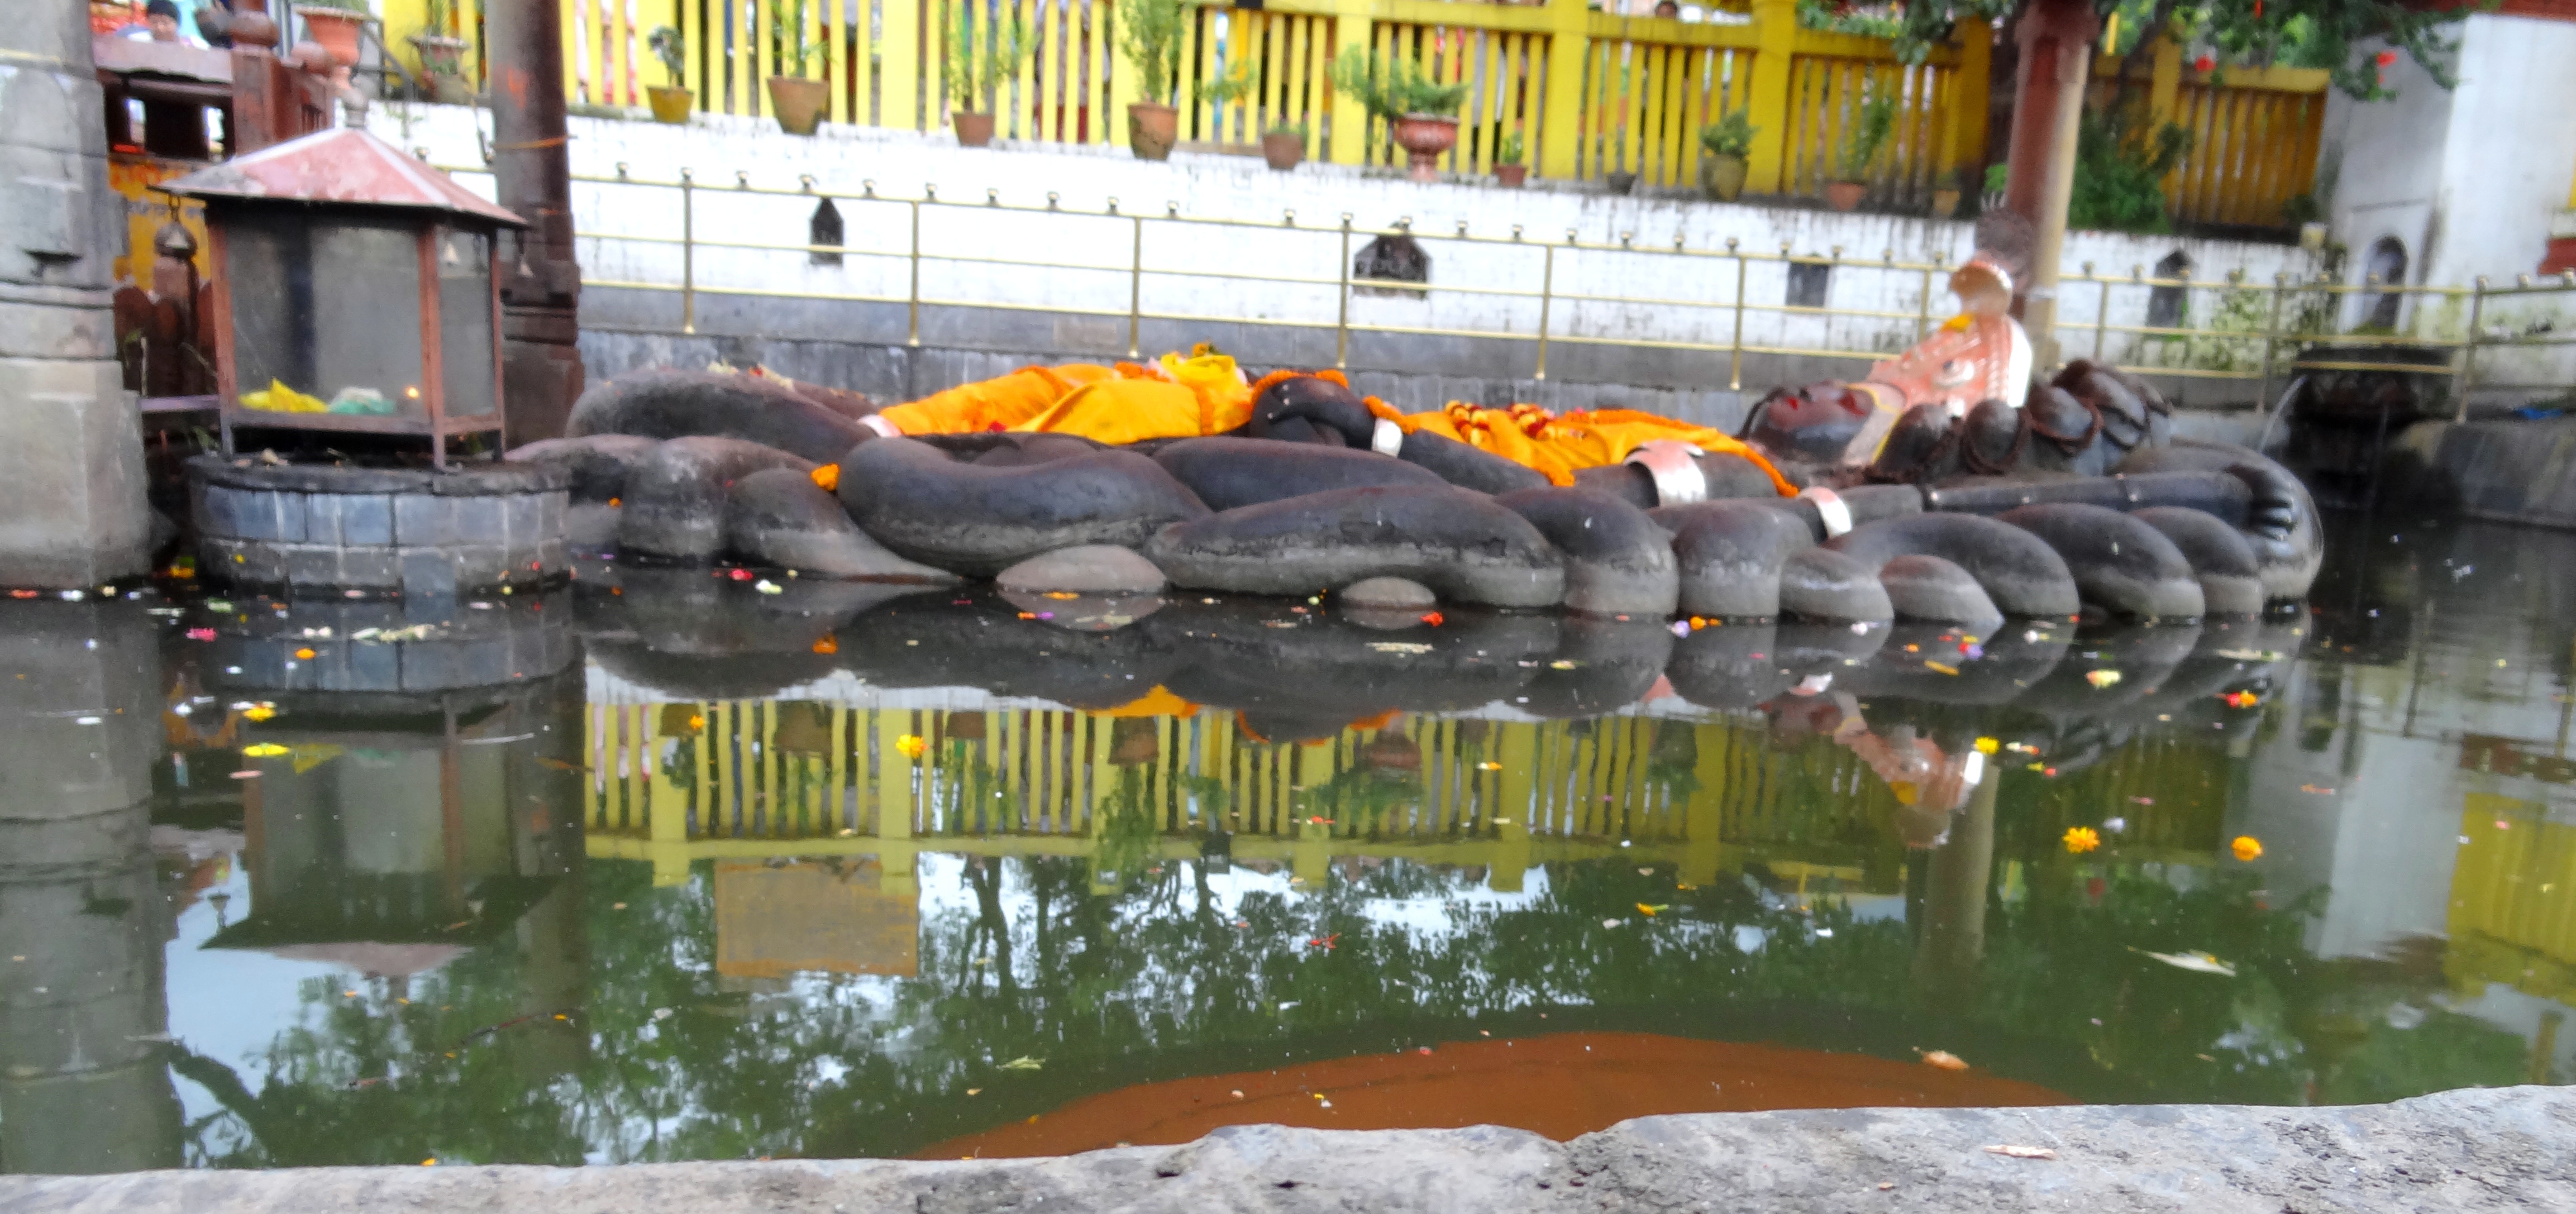 10-miracle-photo-buddha-nilkanth-reflecting-in-the-water-180-degrees-below-himself